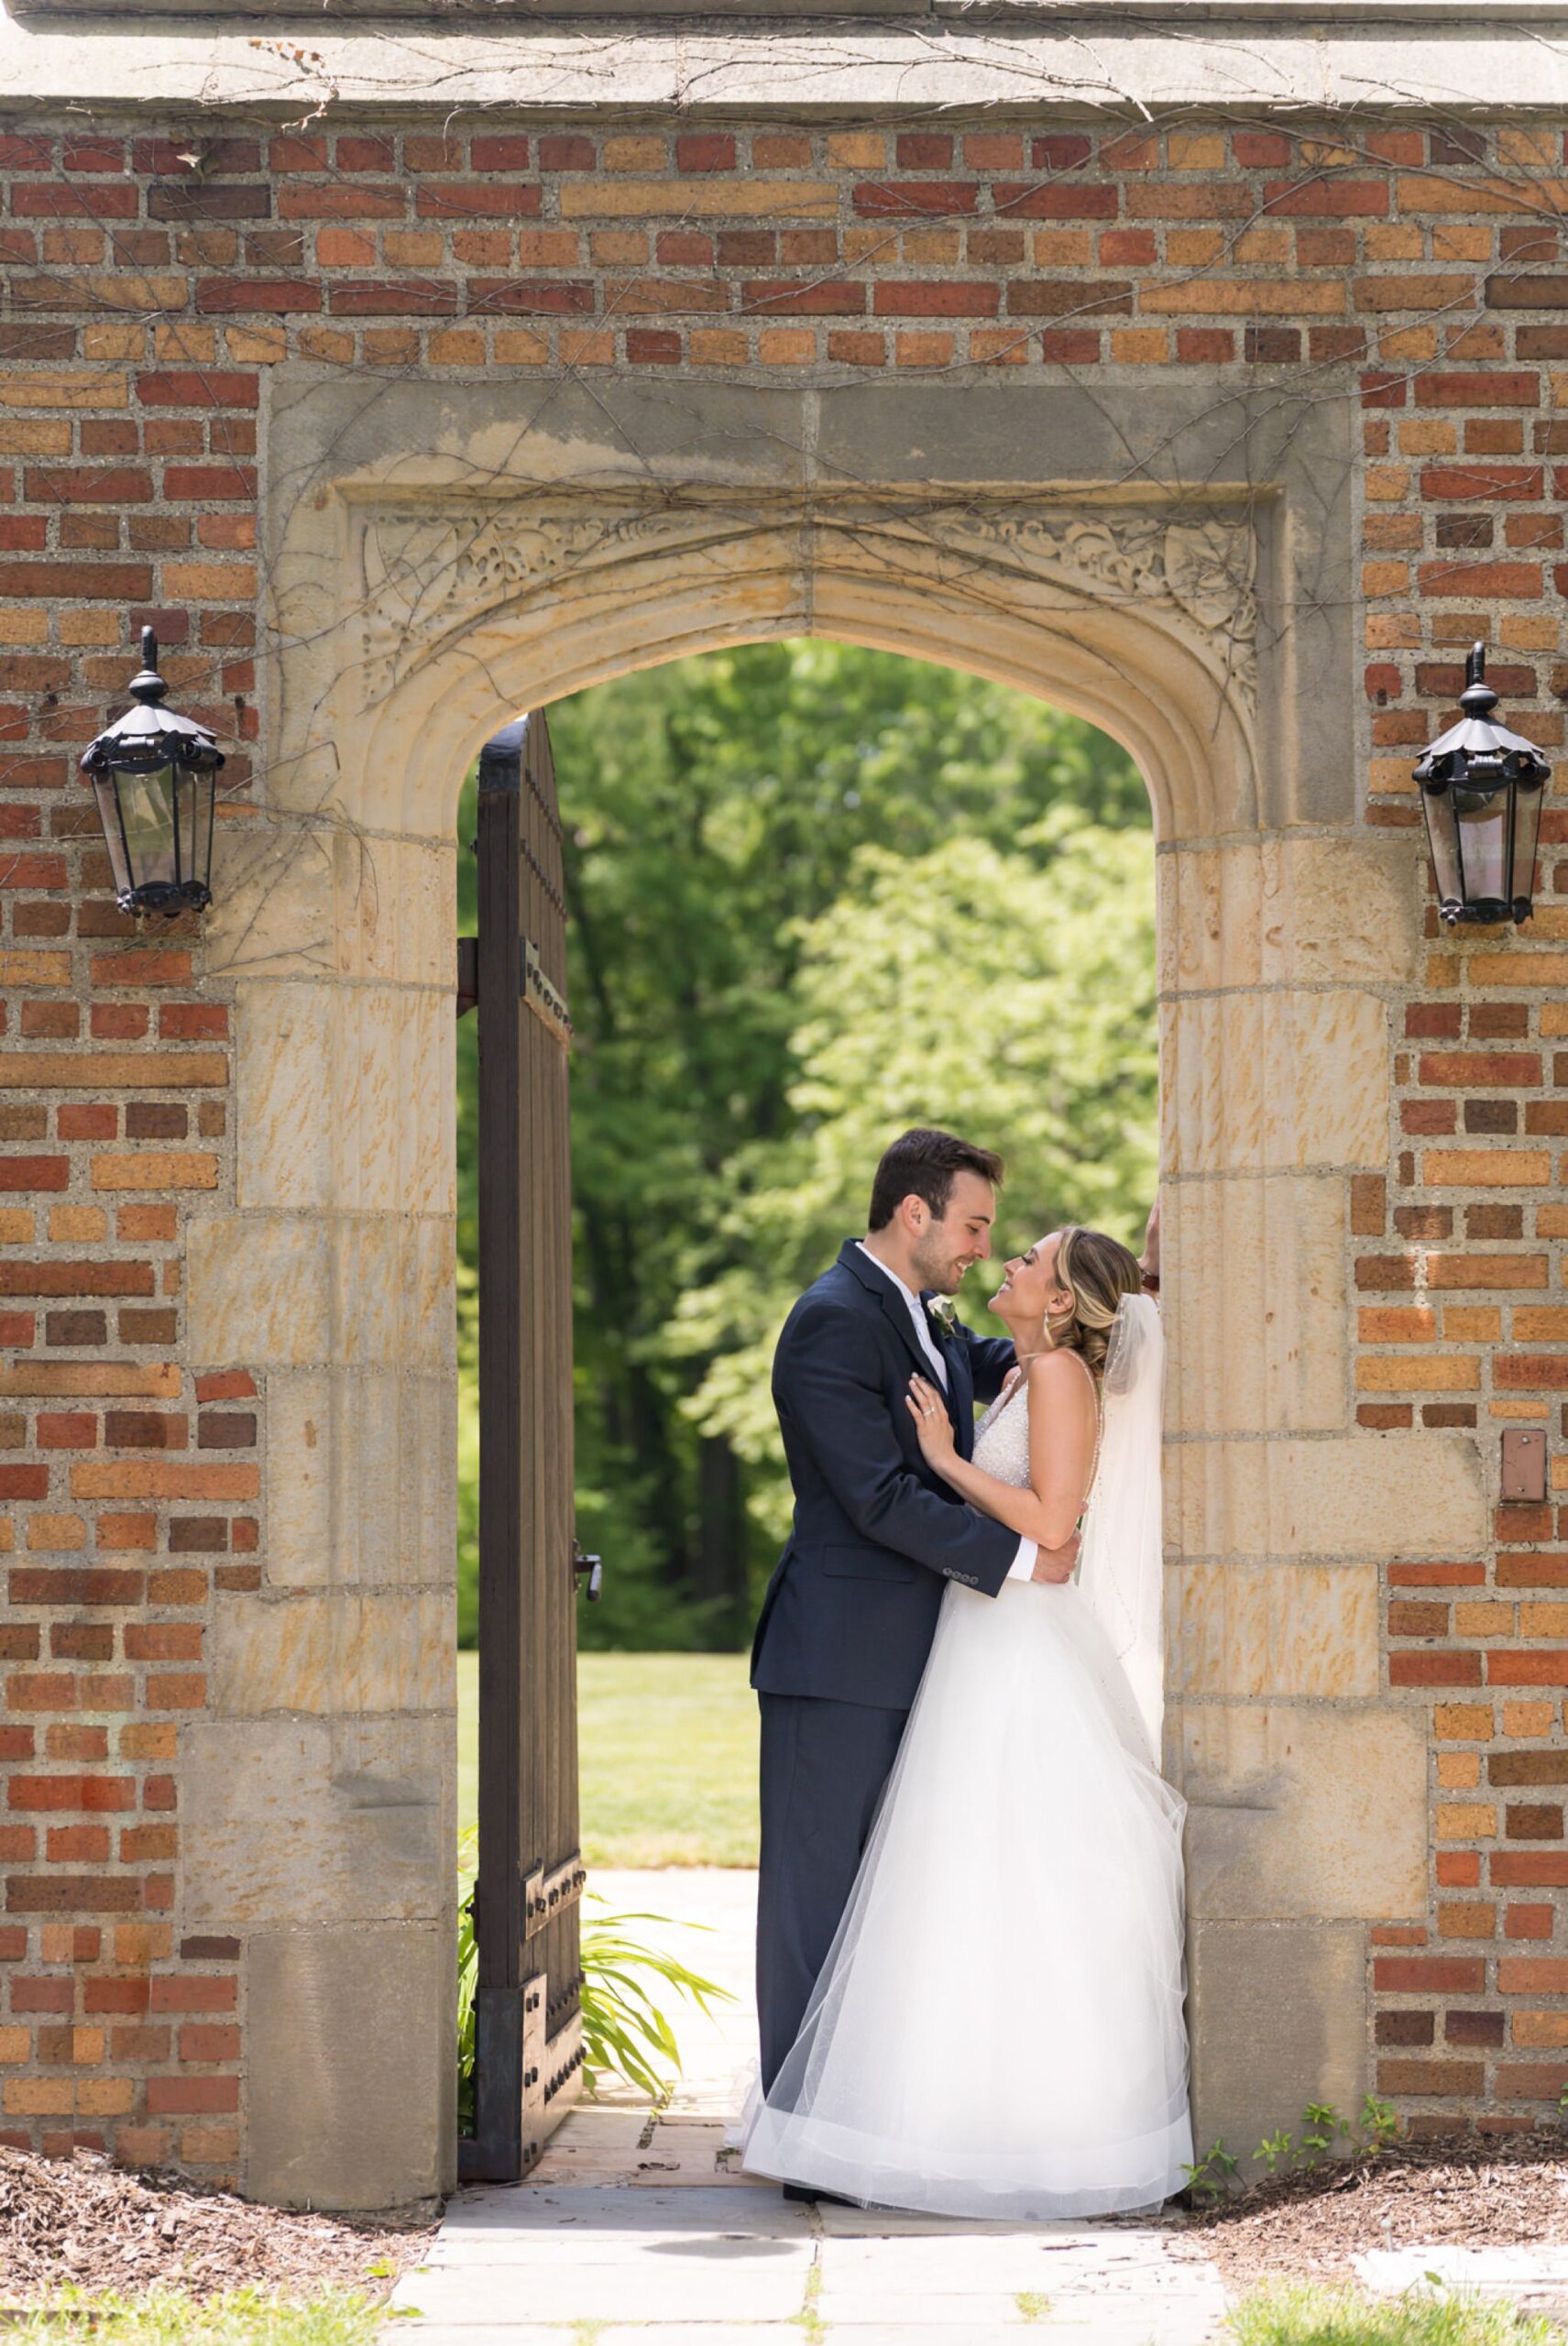 A bride and groom pose and almost kiss in an archway at their wedding at Meadowbrook Hall.  